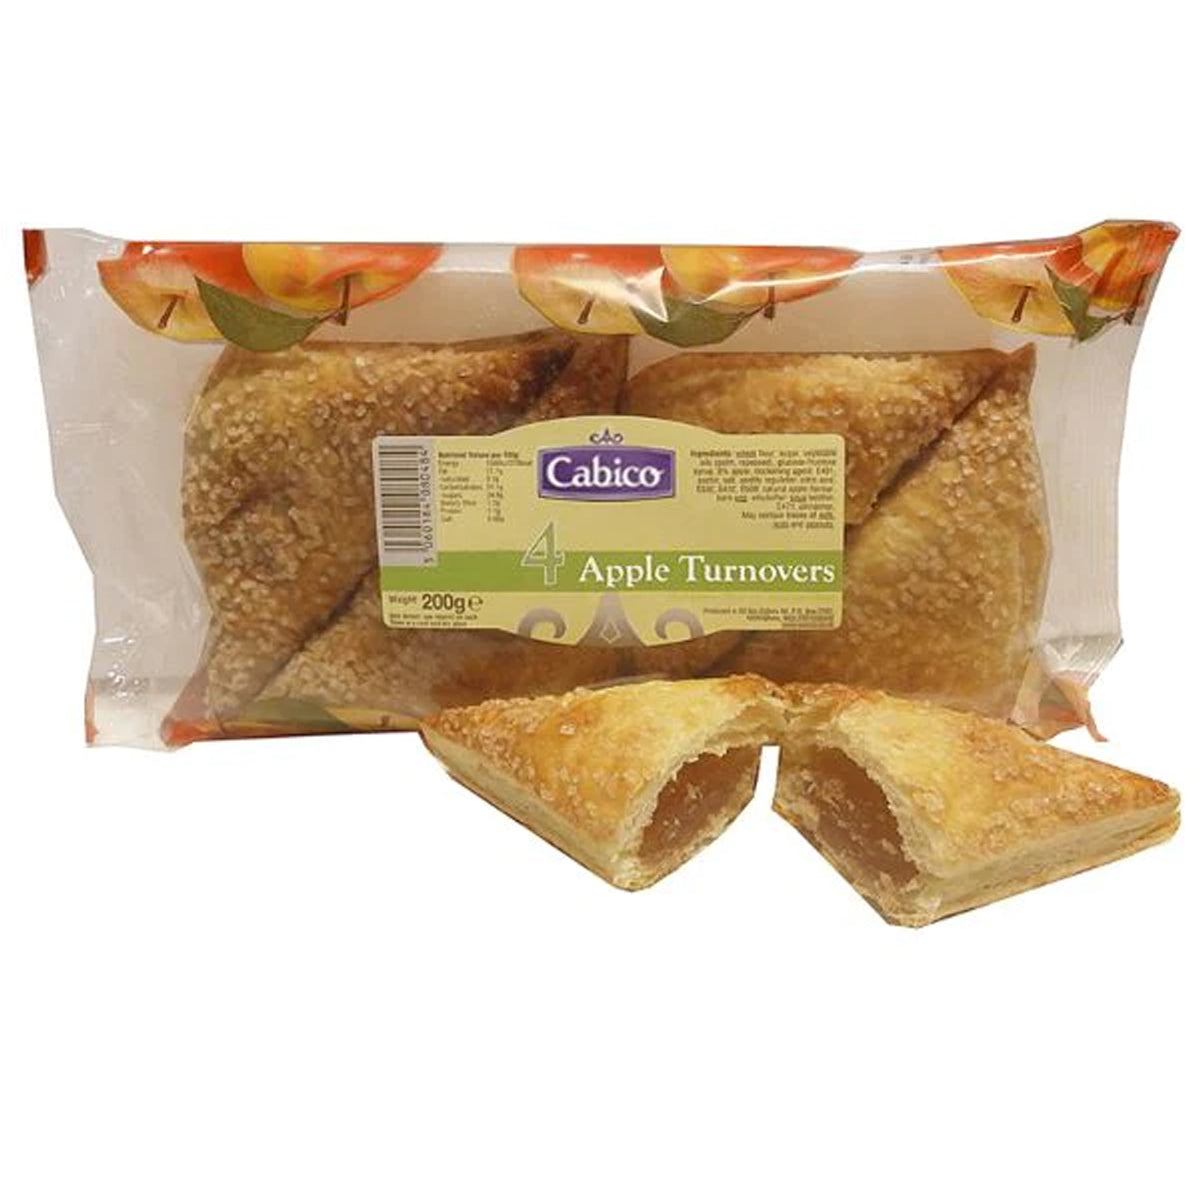 A bag of Cabico - 4 Apple Turnovers - 200g with a piece cut out of it.